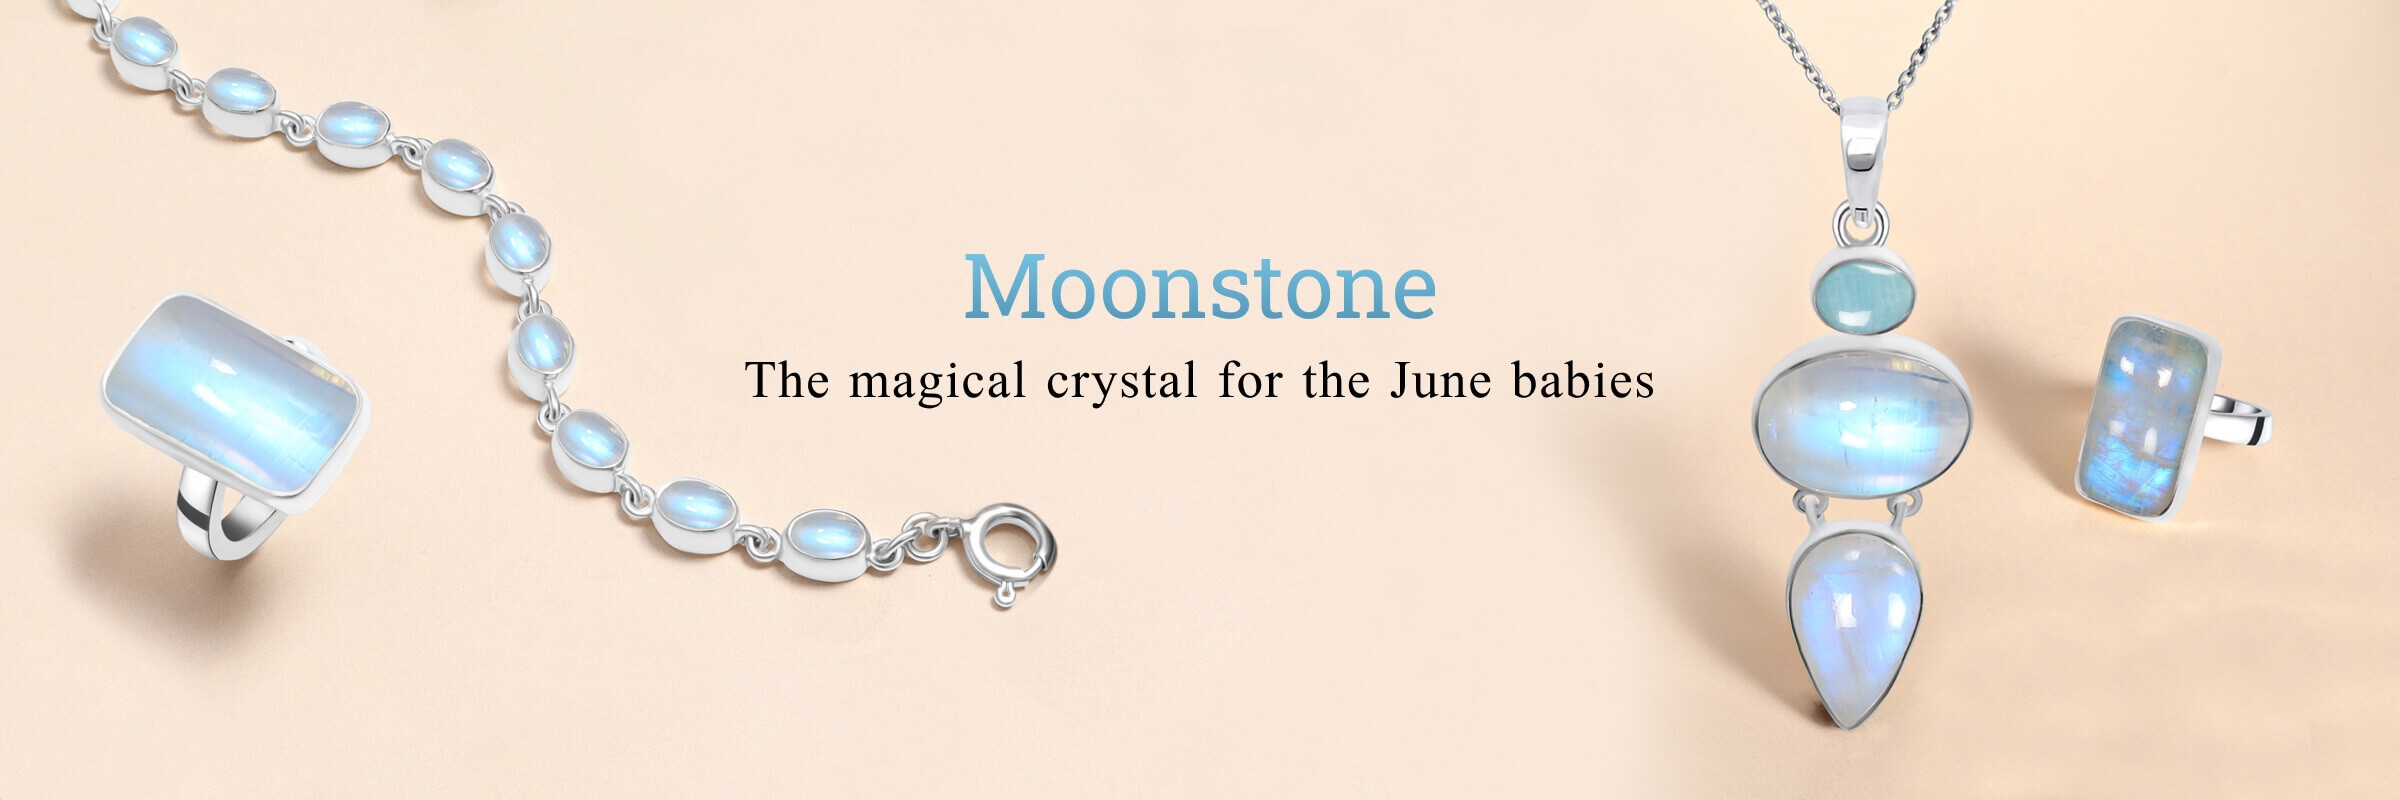 Moonstone - The magical crystal for the June babies